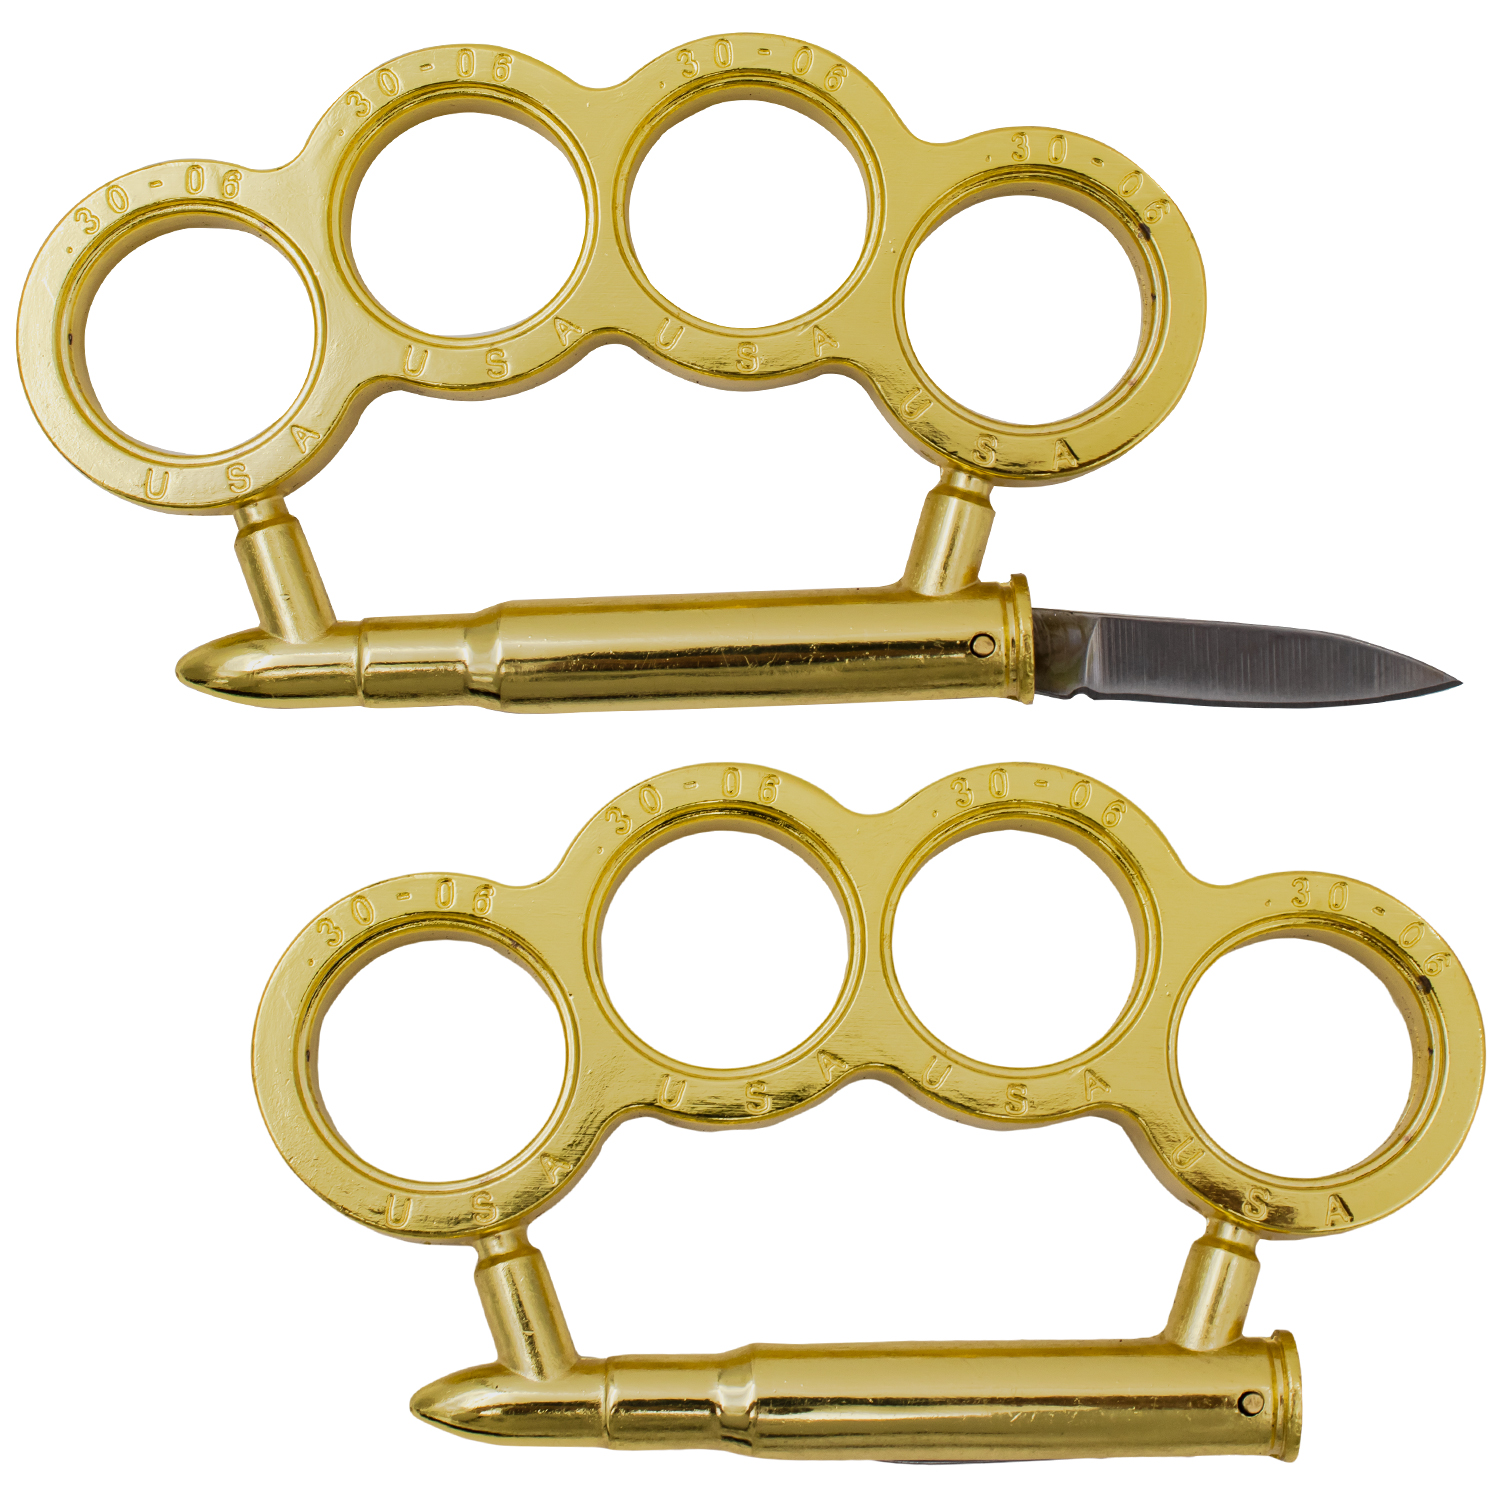 30 06 Caliber Bullet Brass Knuckle with Folding Knife Gold